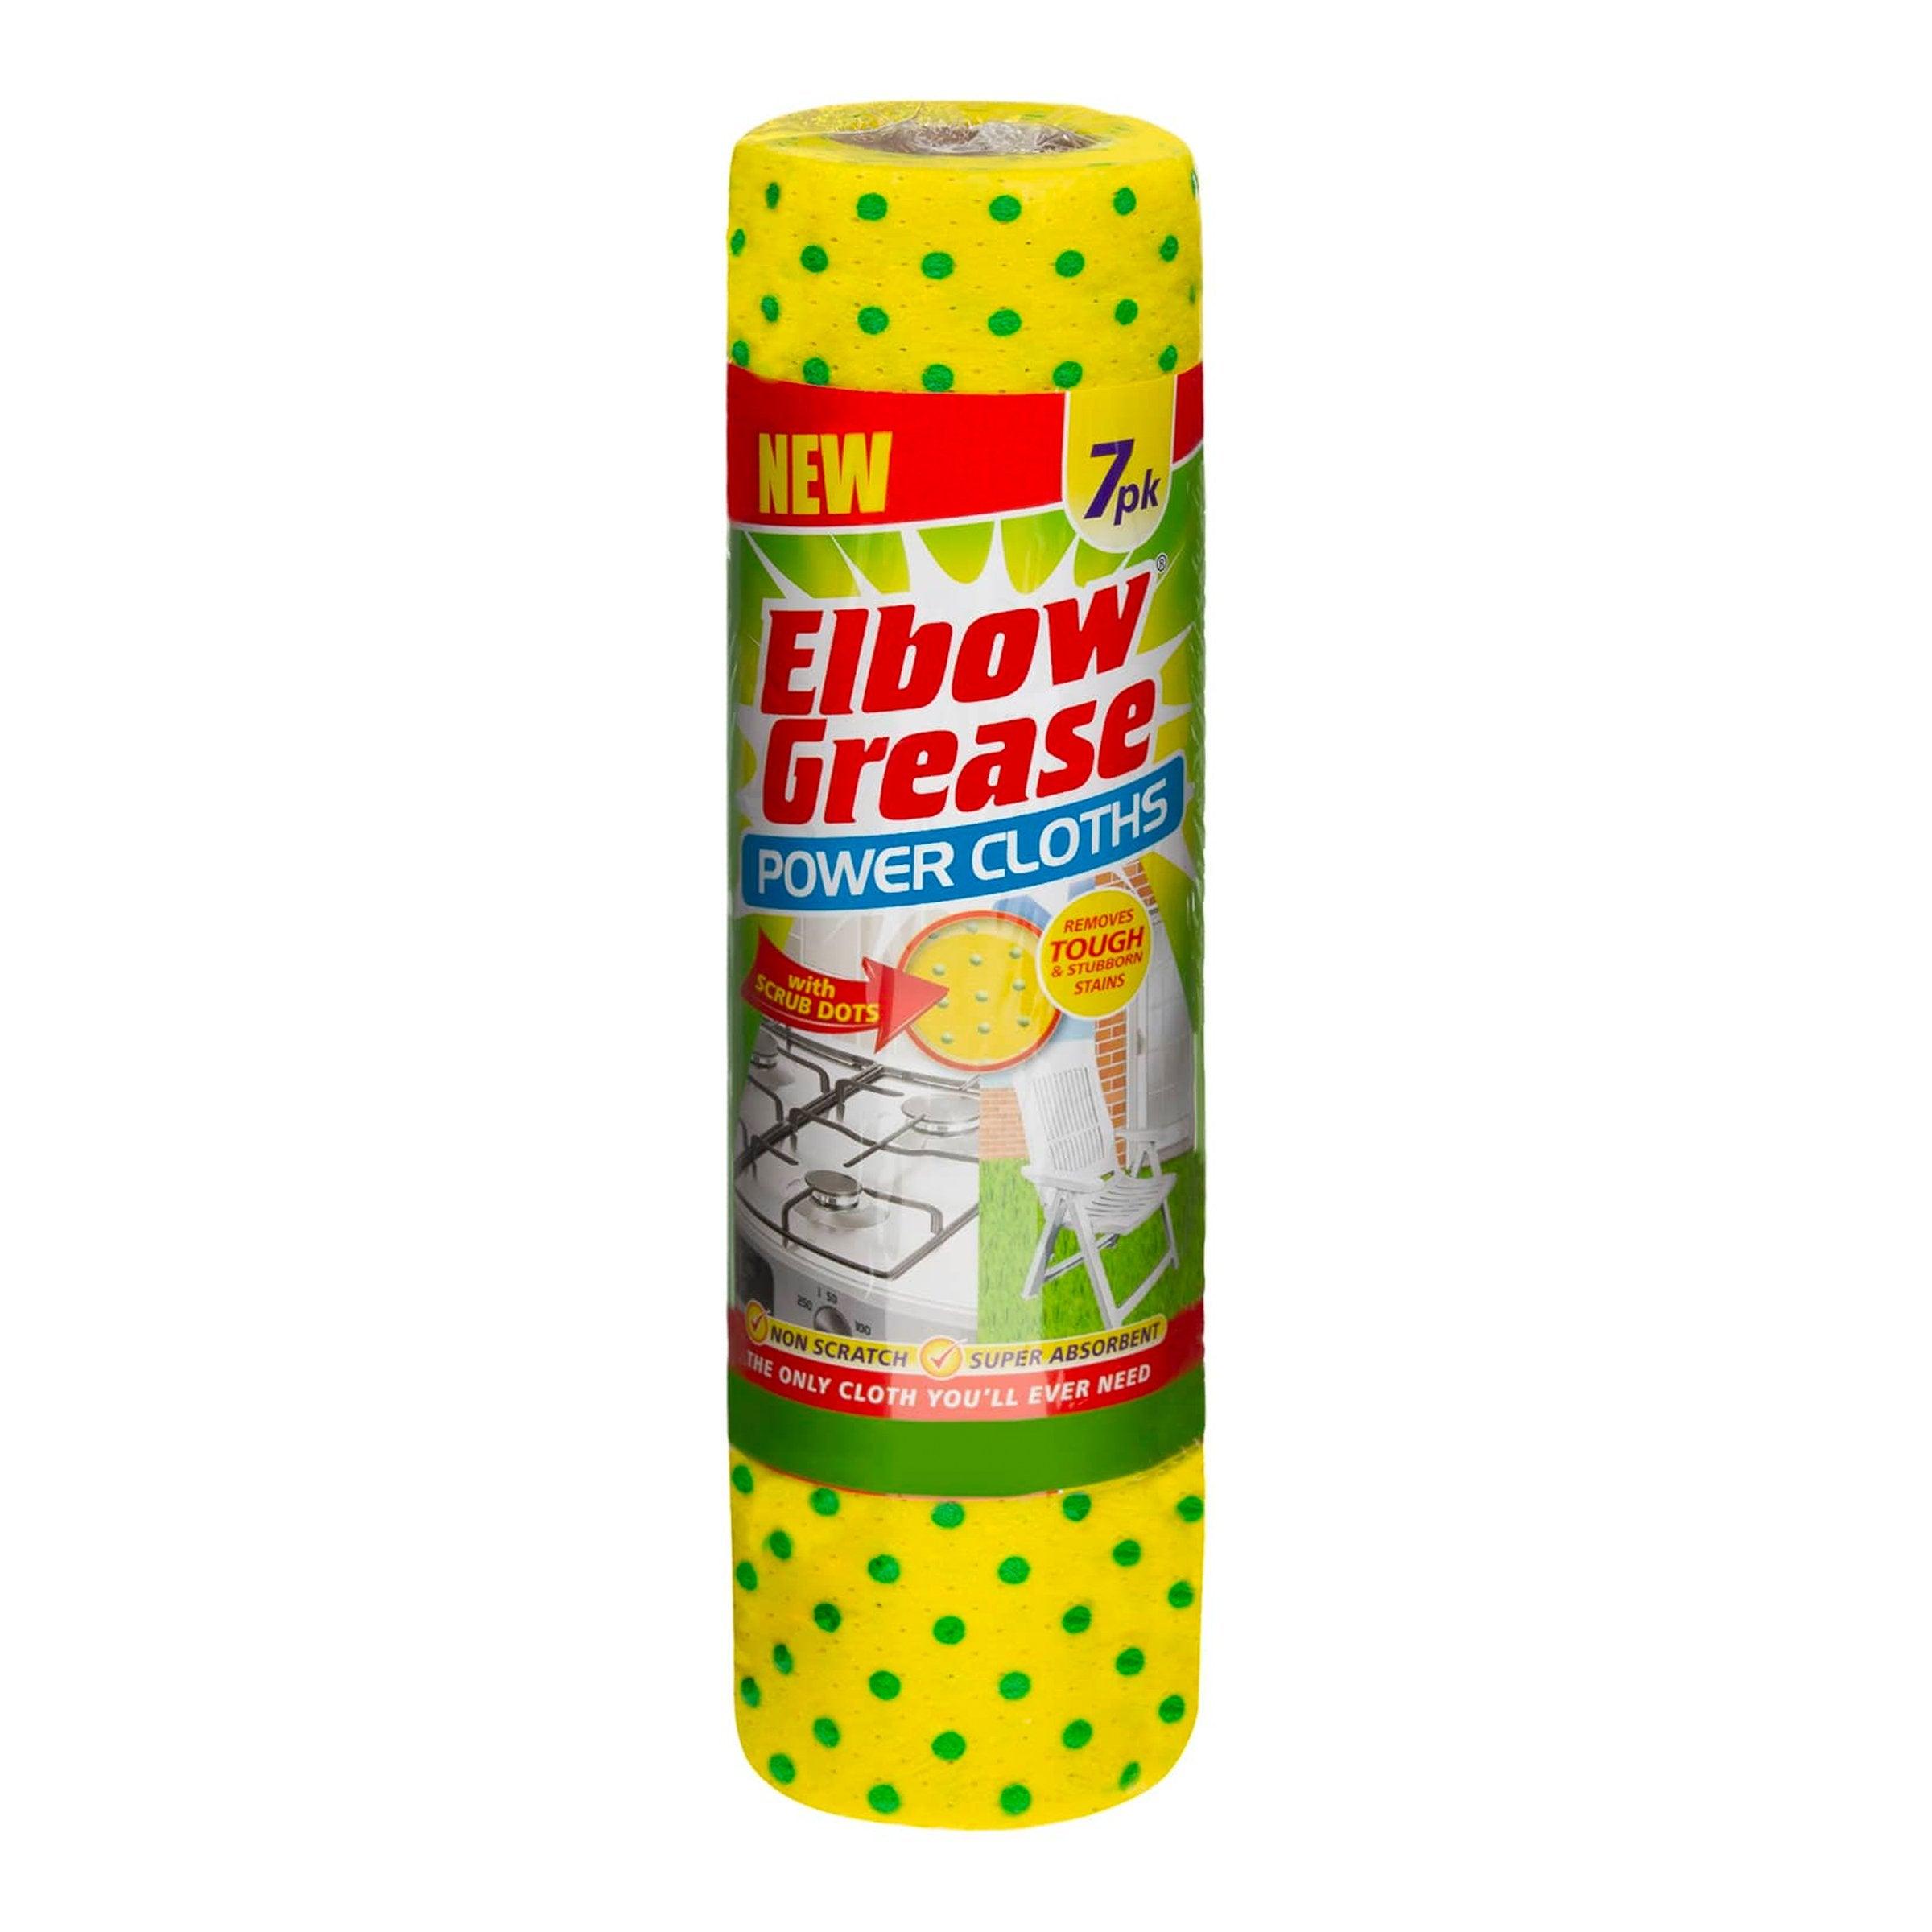 Elbow Grease Power Cloths Roll - Pack of 7 - Vending Superstore